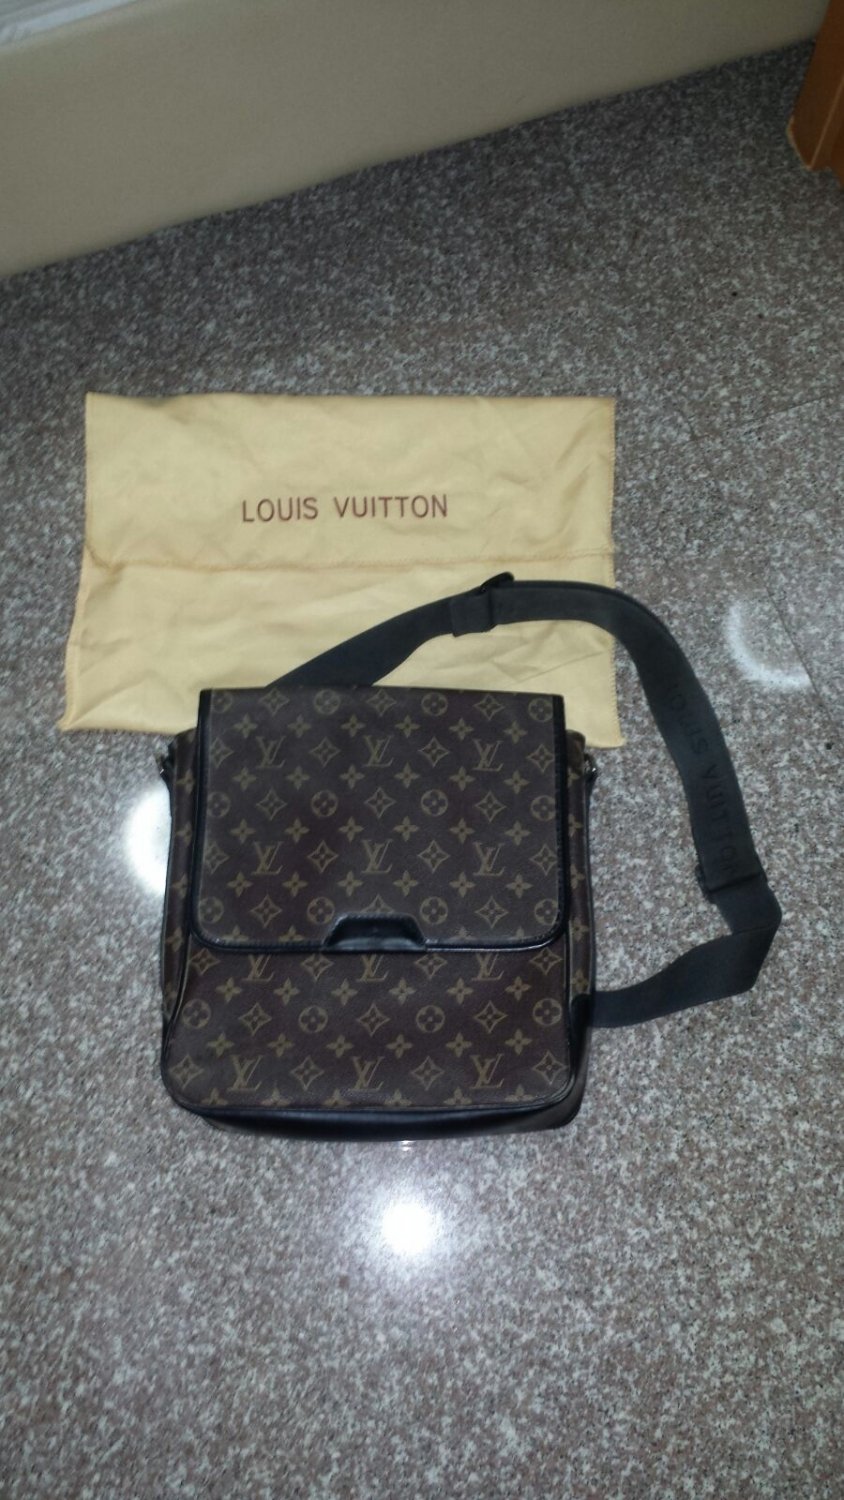 How Much Does A Louis Vuitton Handbag Cost | Confederated Tribes of the Umatilla Indian Reservation